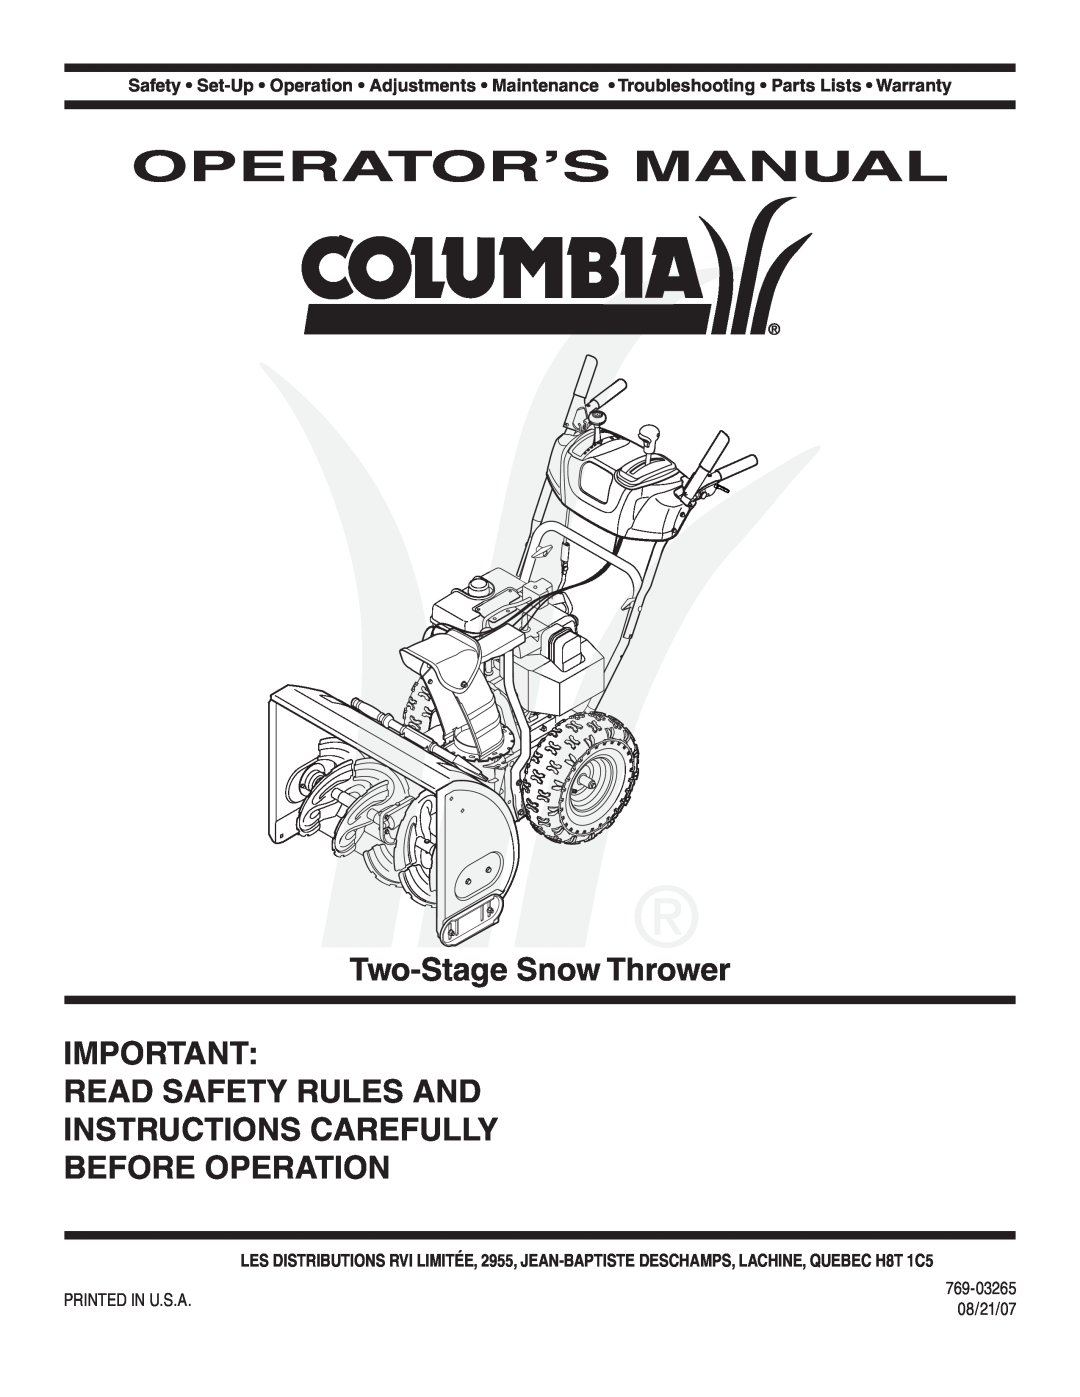 MTD 769-03265 warranty Operator’S Manual, Two-StageSnow Thrower, Read Safety Rules And Instructions Carefully, 08/21/07 